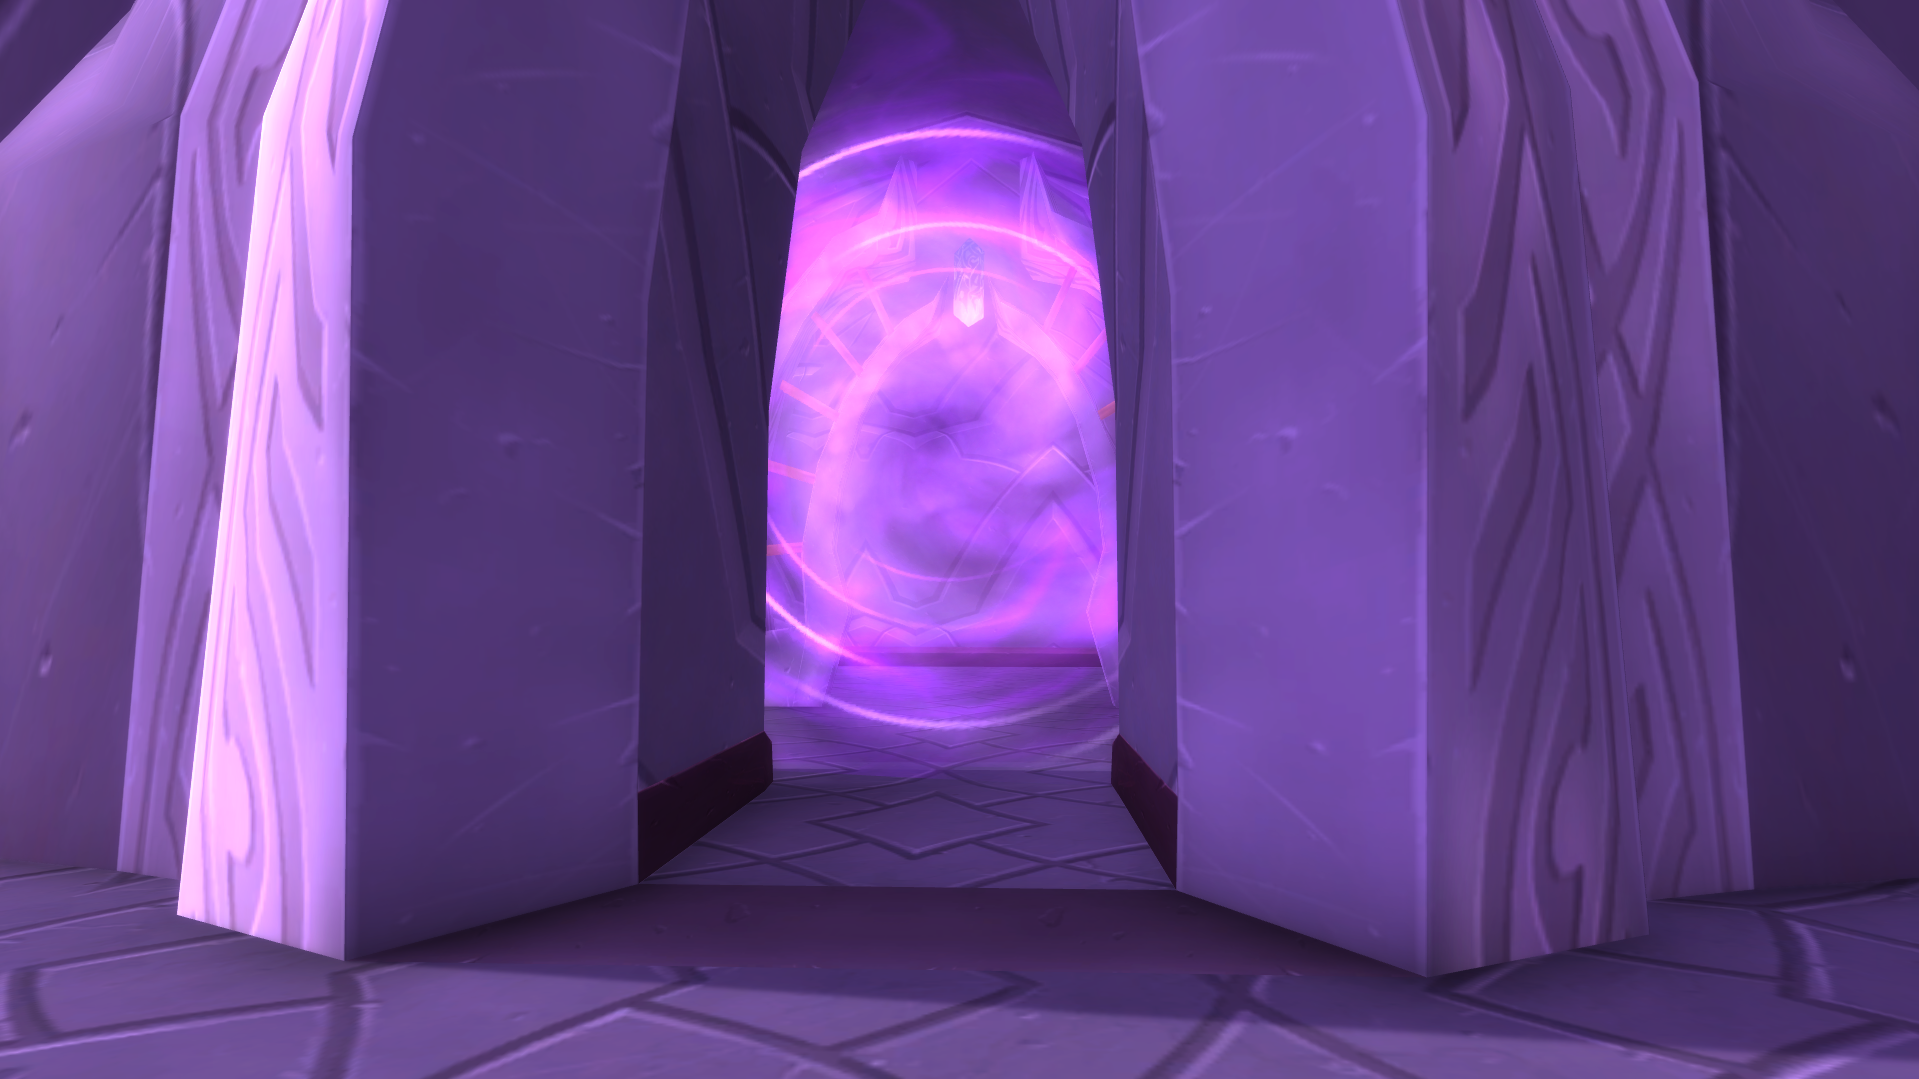 WoW A mythical portal in a narrow passage